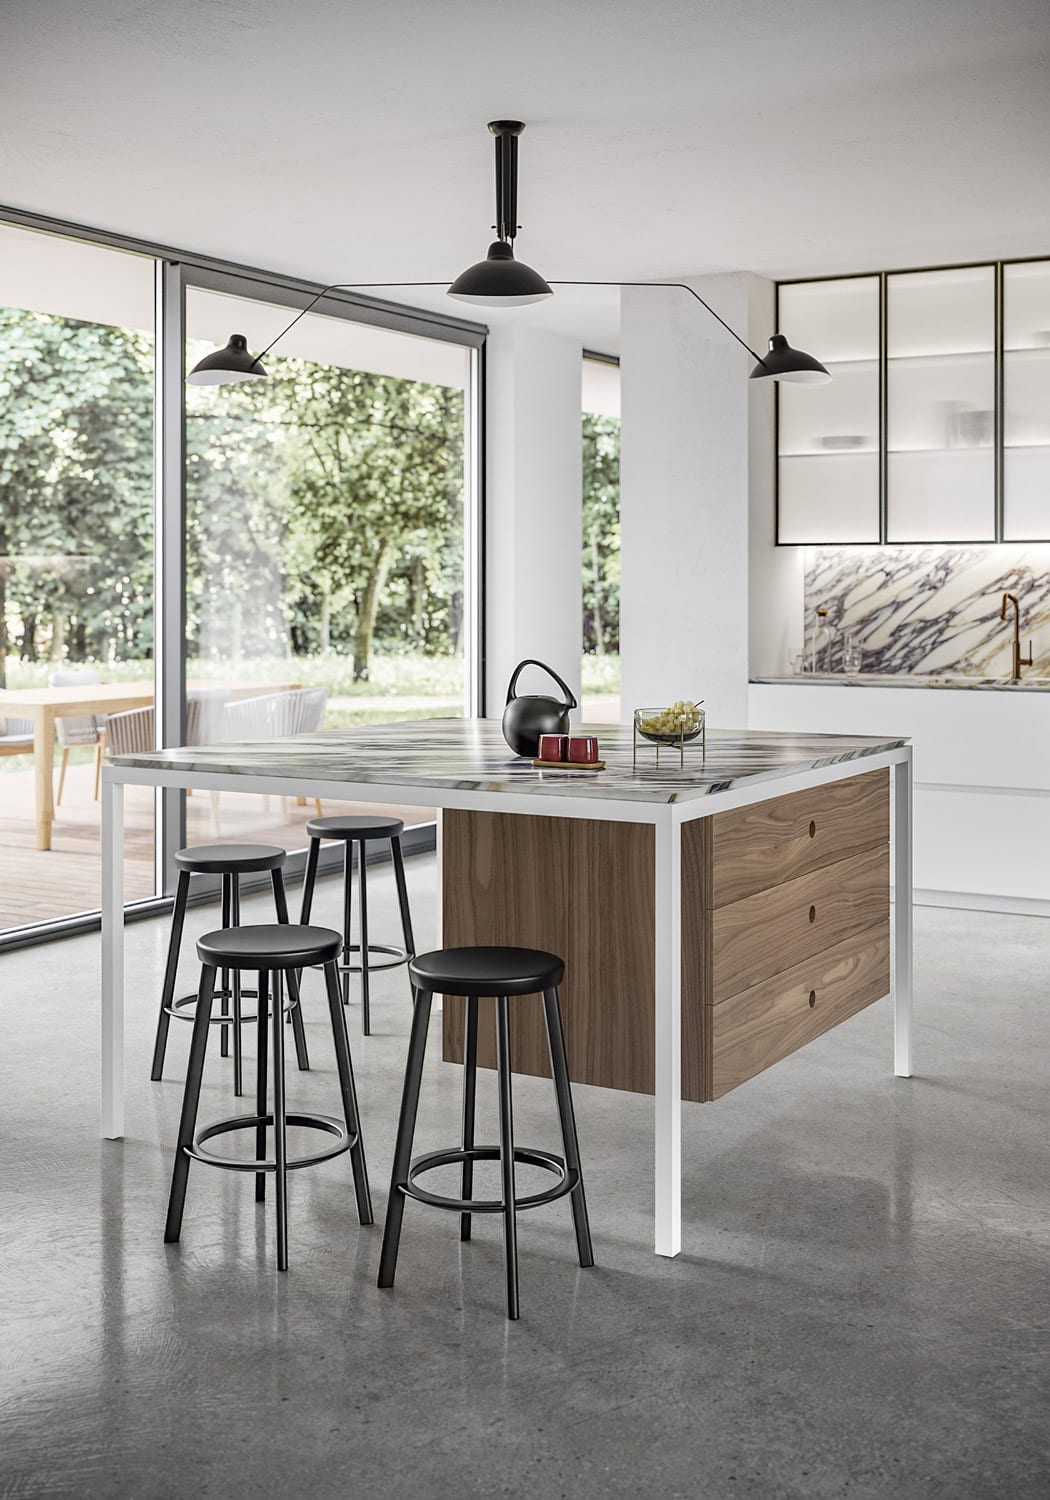 The square-shaped island/counter becomes a multifunctional space with the addition of a suspended set of drawers to store cutlery and other utensils. 